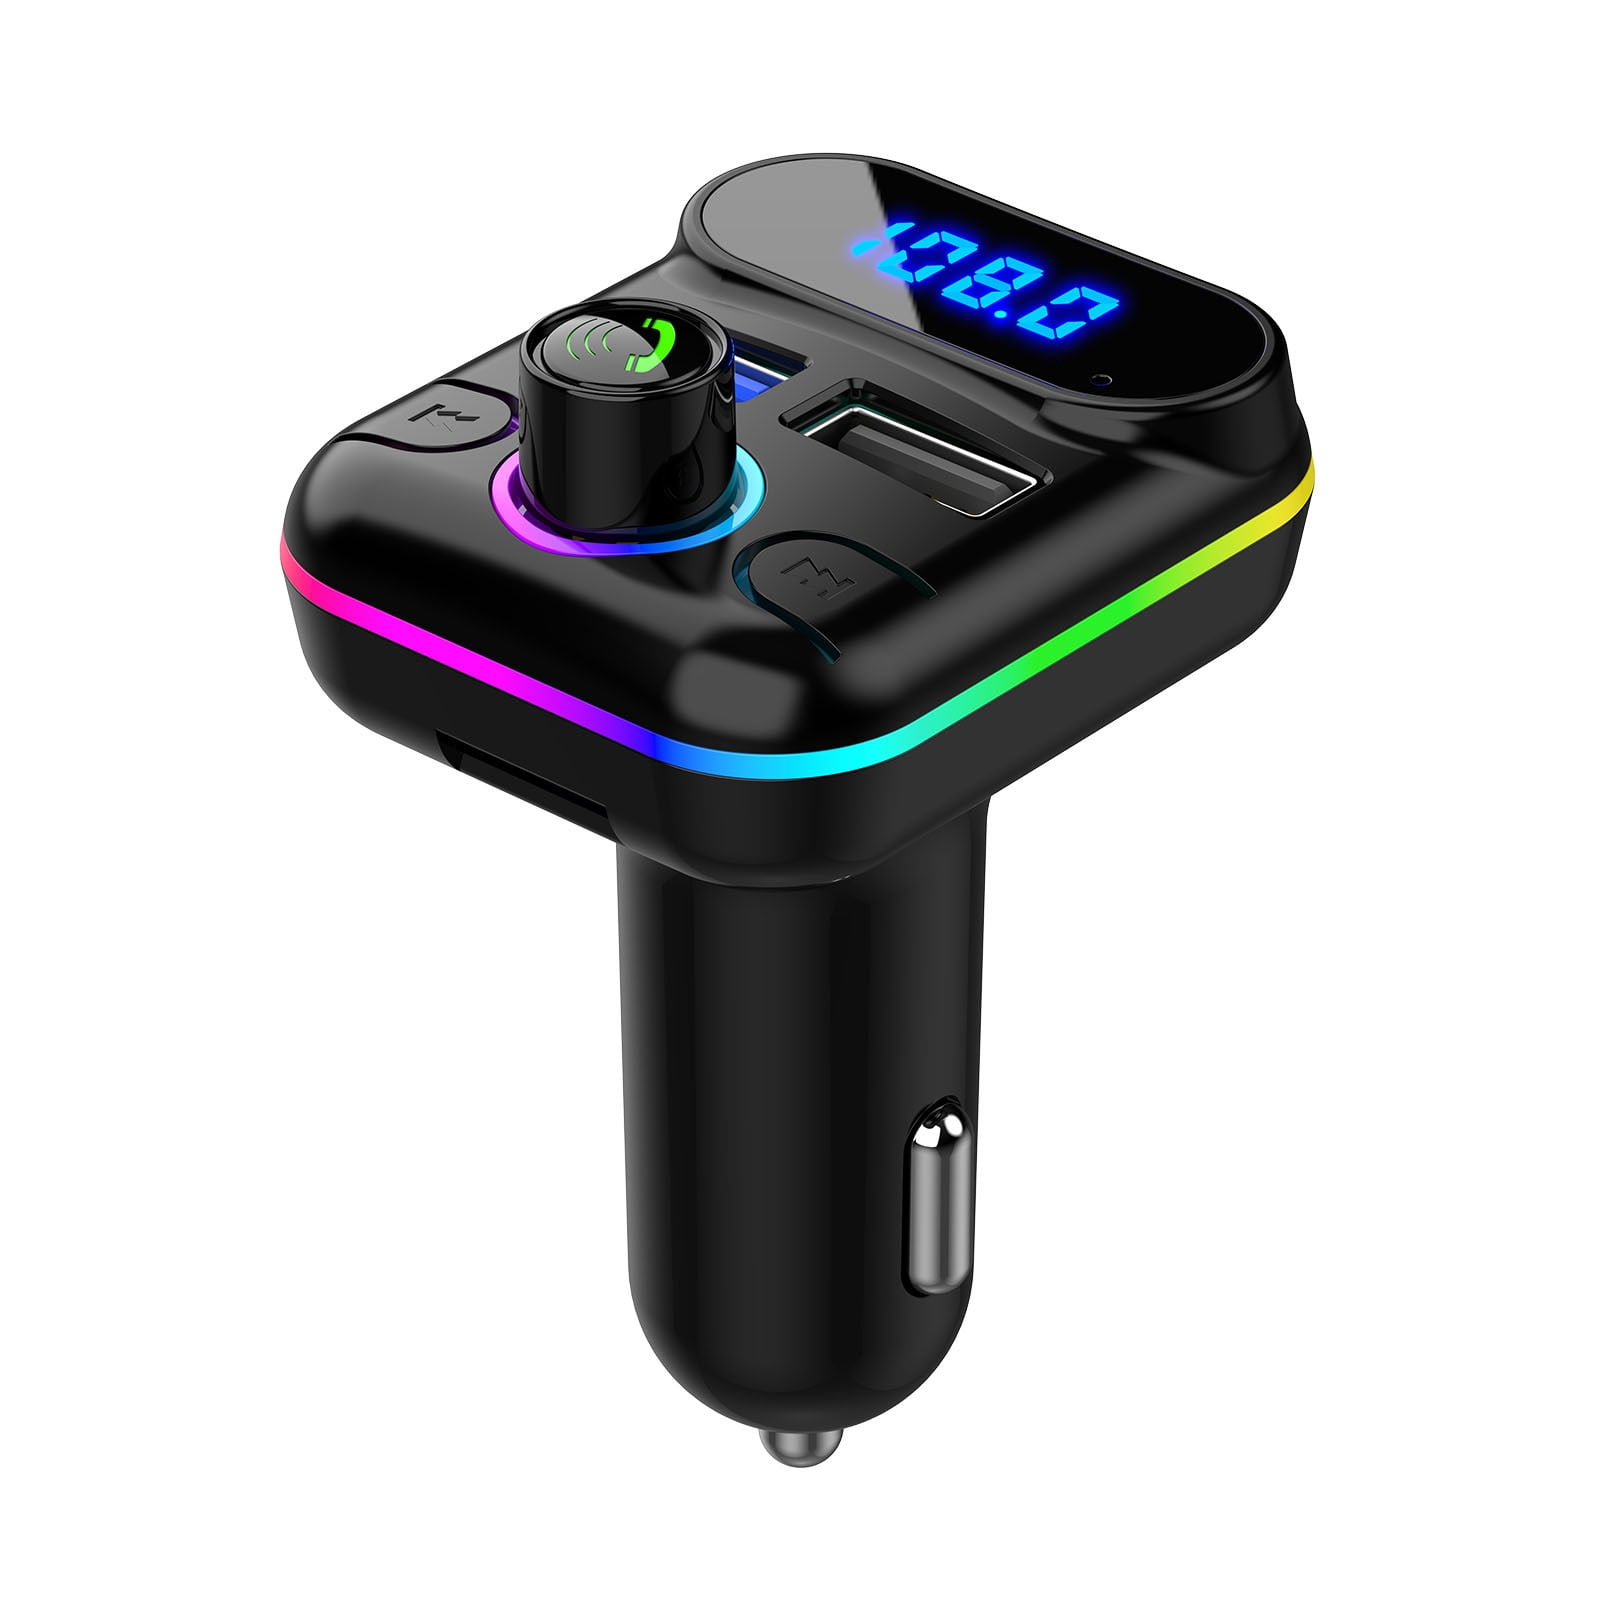 amlbb Car Bluetooth 5.0 Wireless Handsfree Car FM Transmitter Receiver Radio  MP3 Adapter Player 2 USB Charger Kit Bluetooth Car Adapter on Clearance 